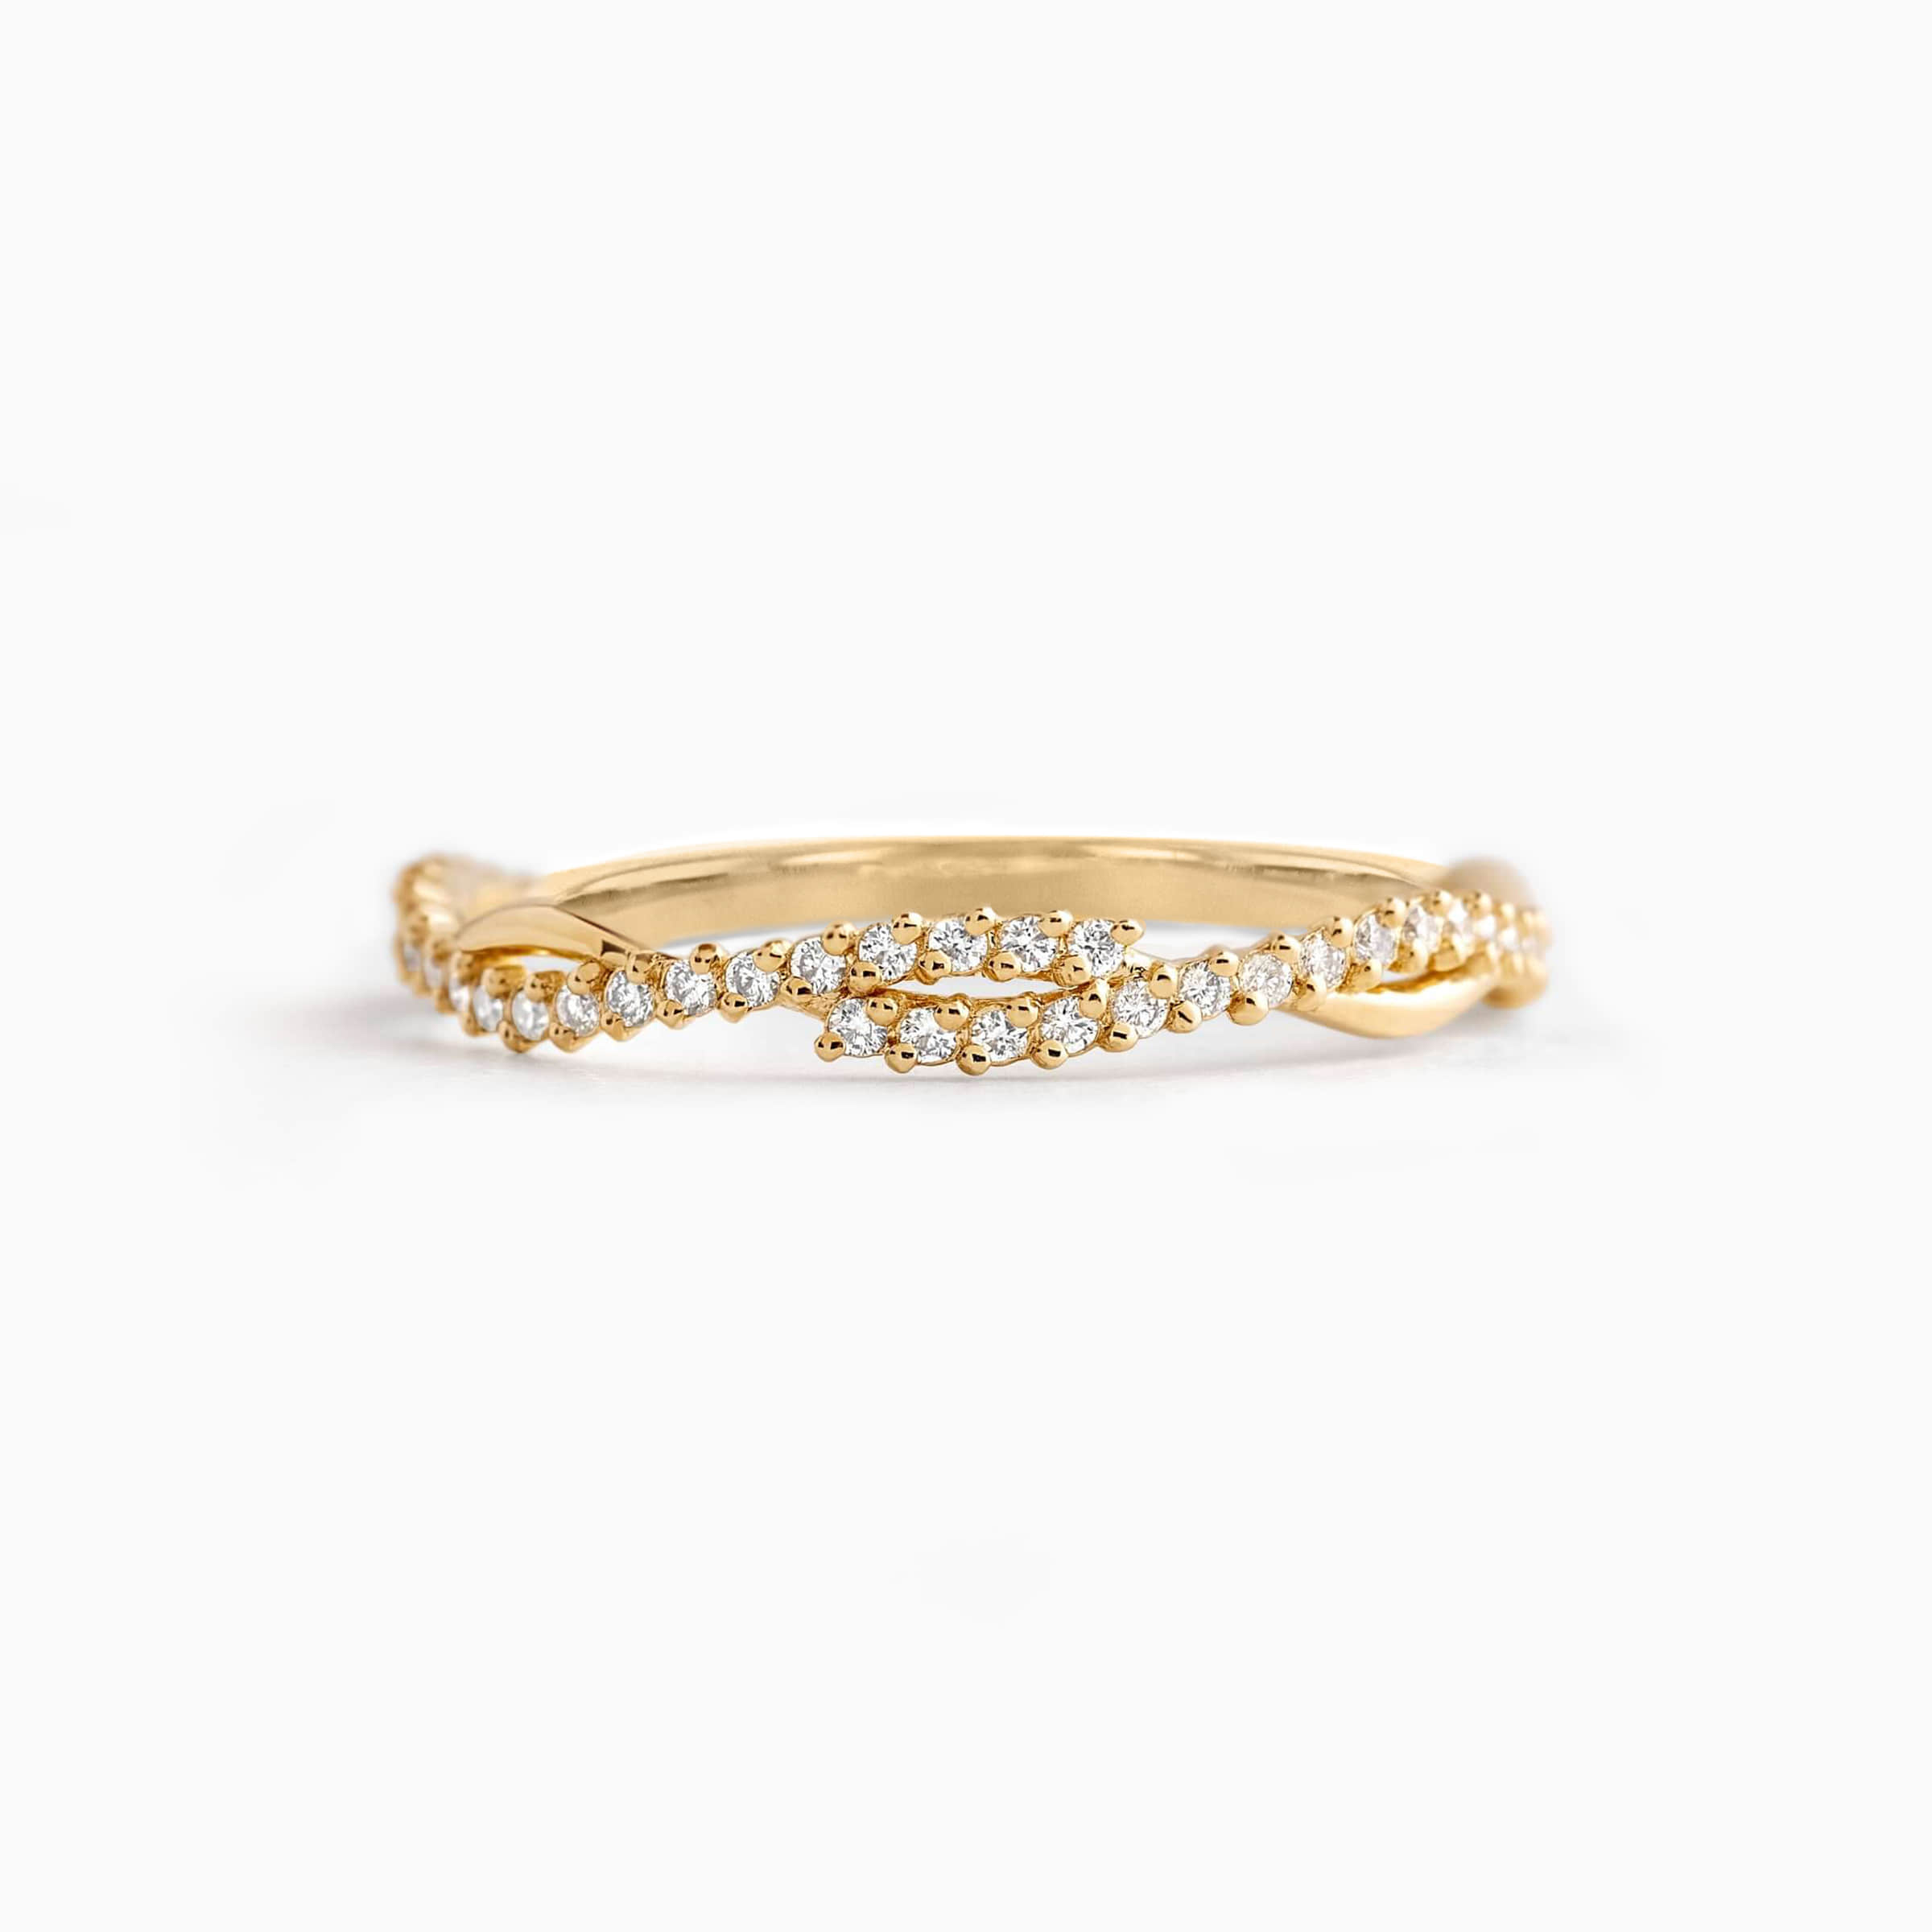 Darry Ring twisted eternity wedding ring in yellow gold